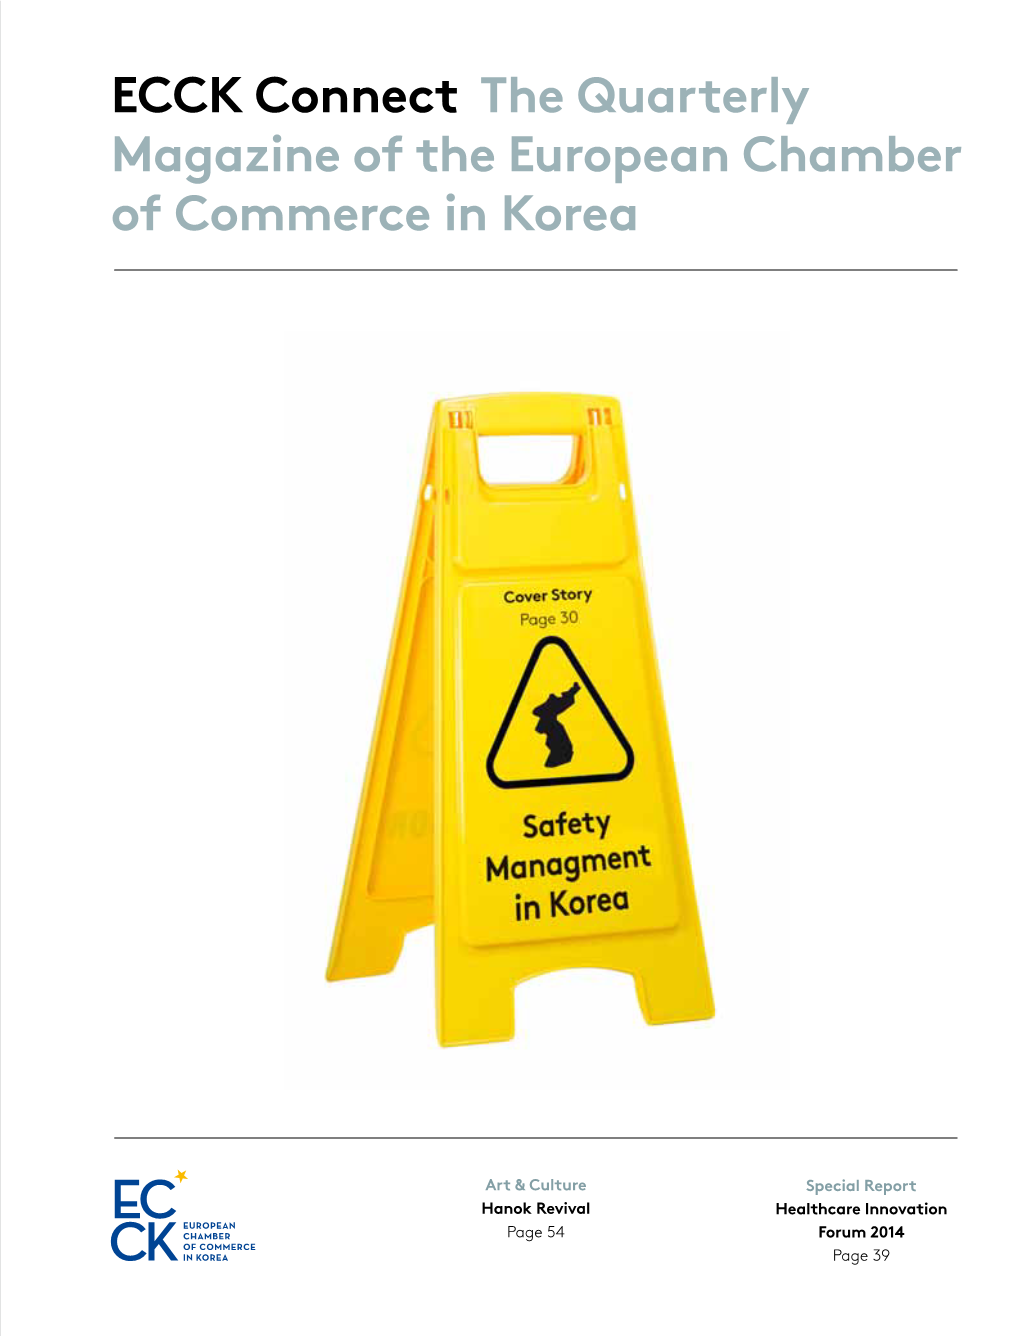 ECCK Connect the Quarterly Magazine of the European Chamber of Commerce in Korea